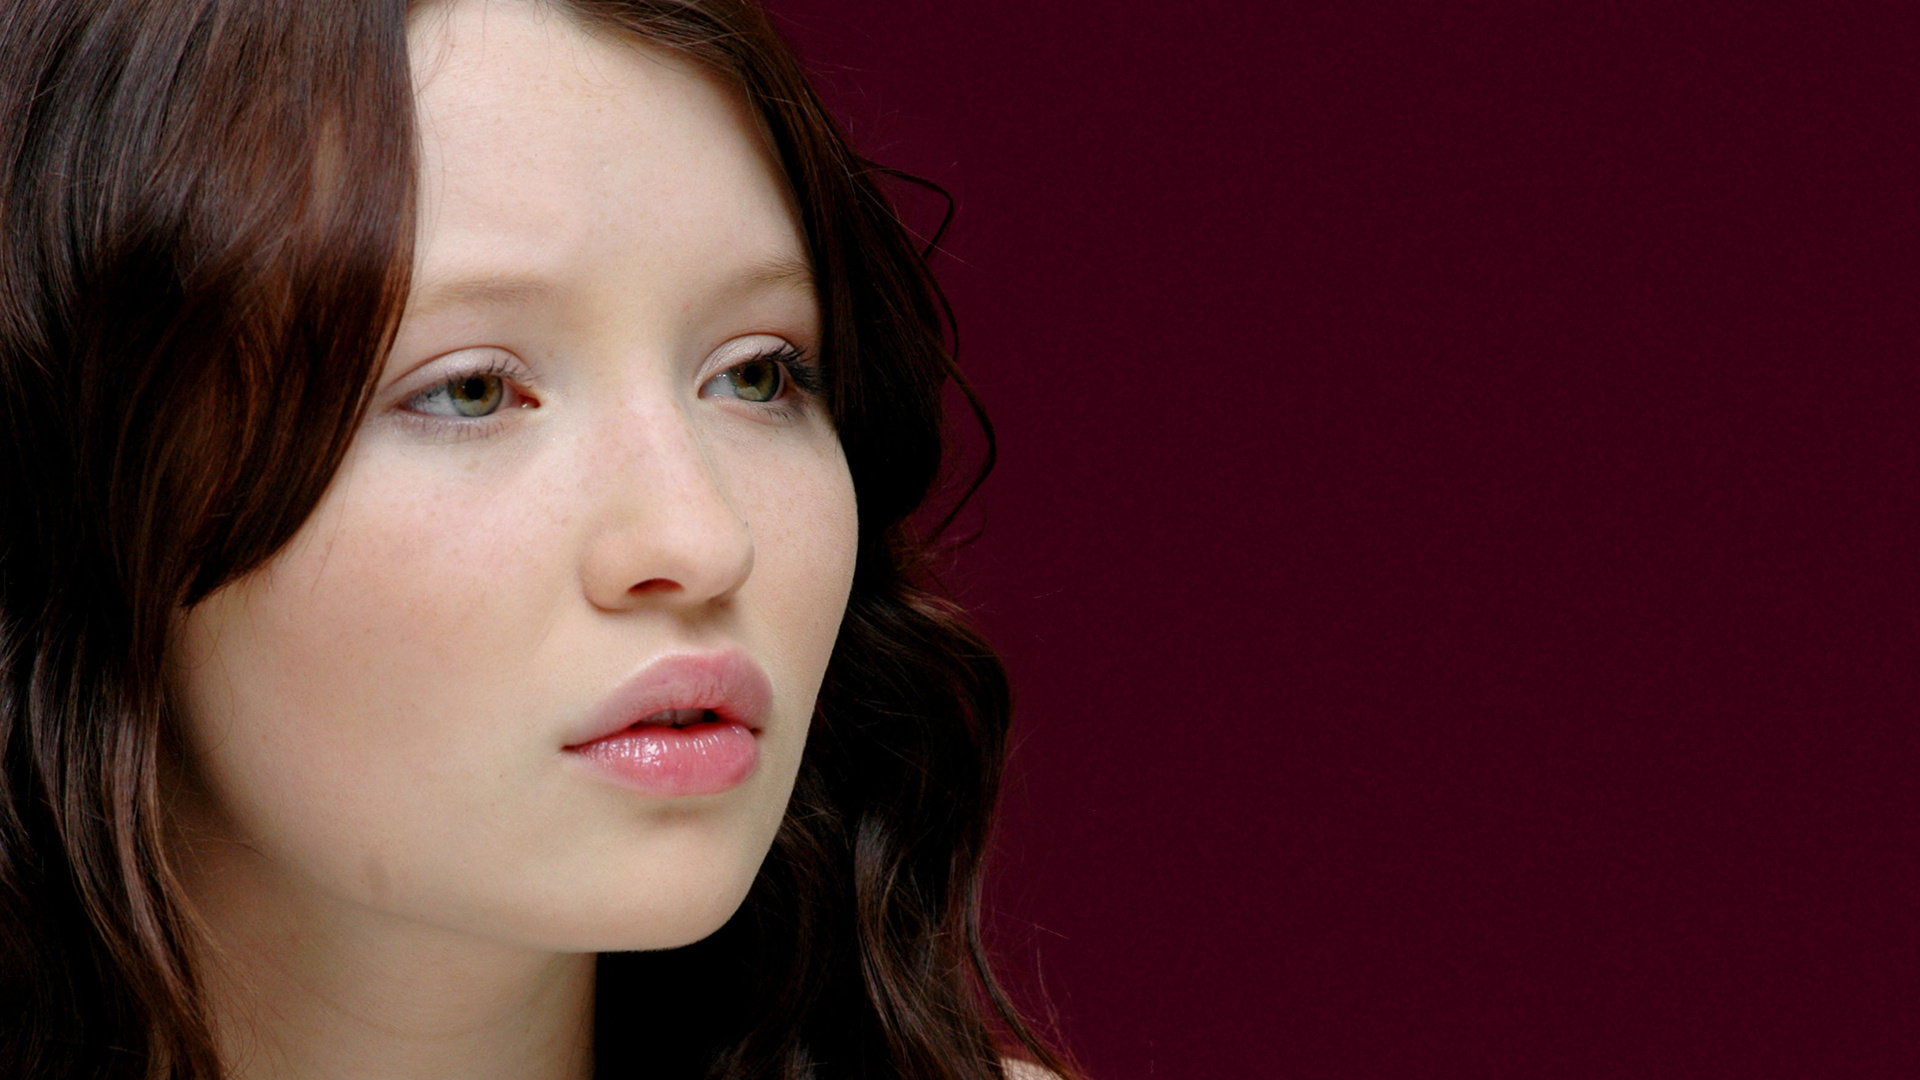 Emily Browning 40037 px, High-resolution image, Detailed photography, Exquisite beauty, 1920x1080 Full HD Desktop